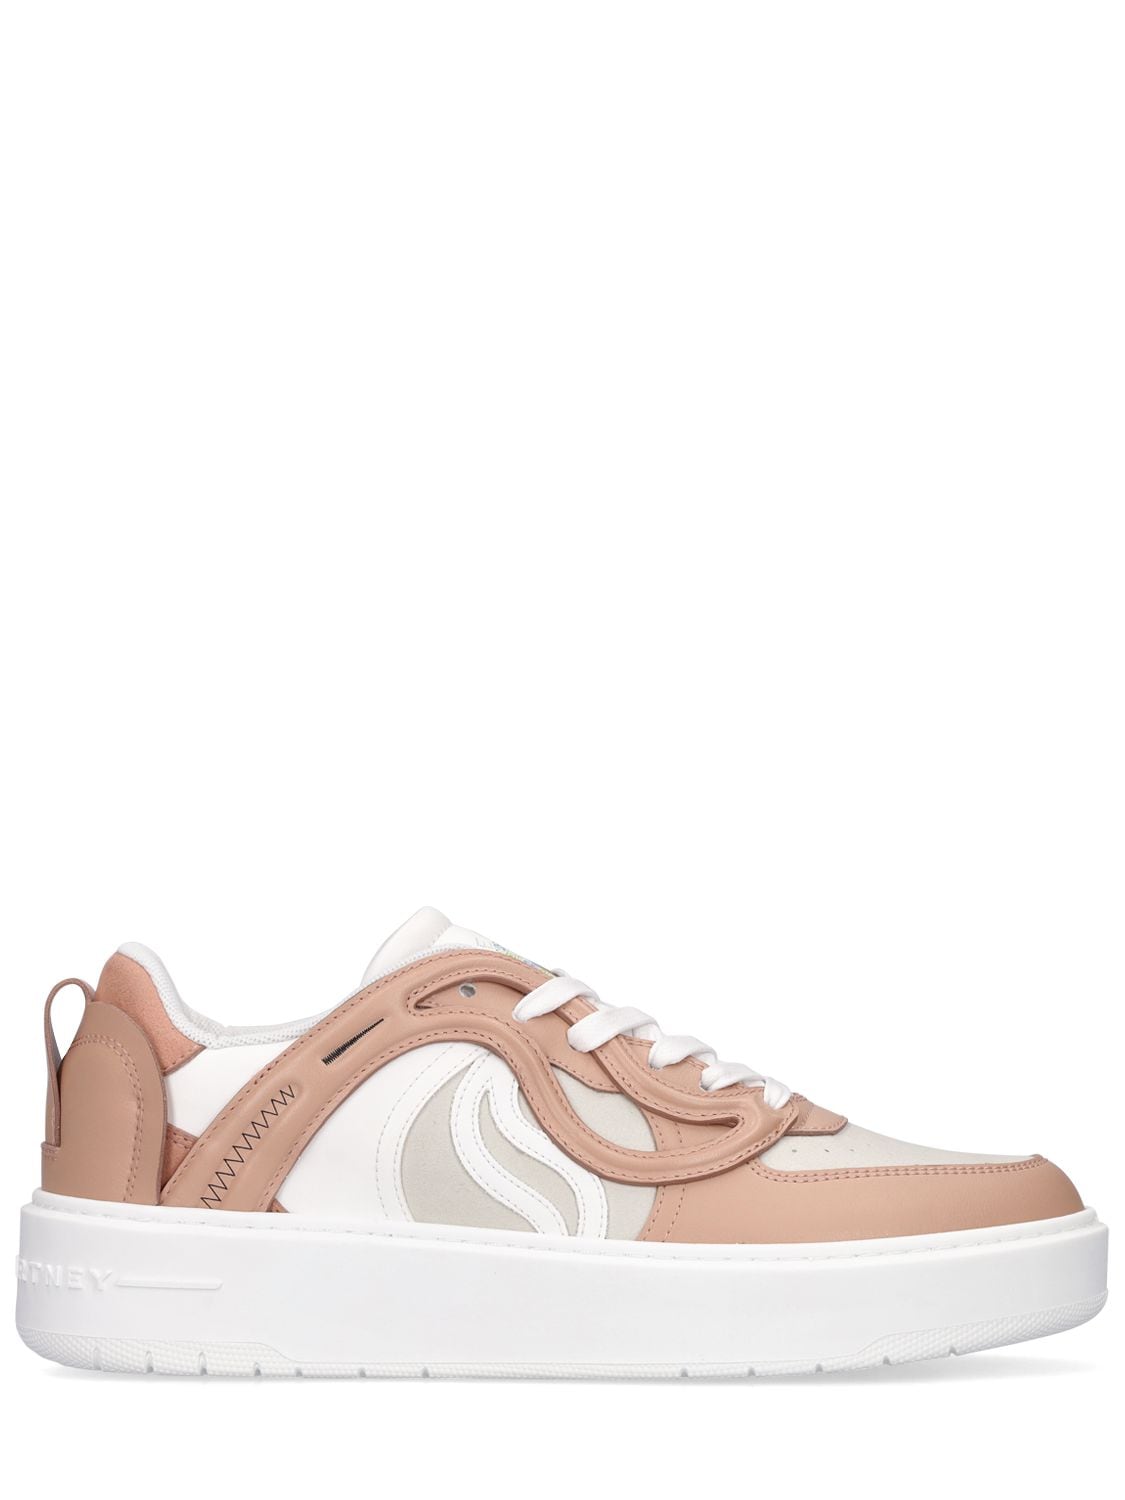 25mm S-wave 1 Faux Leather Sneakers